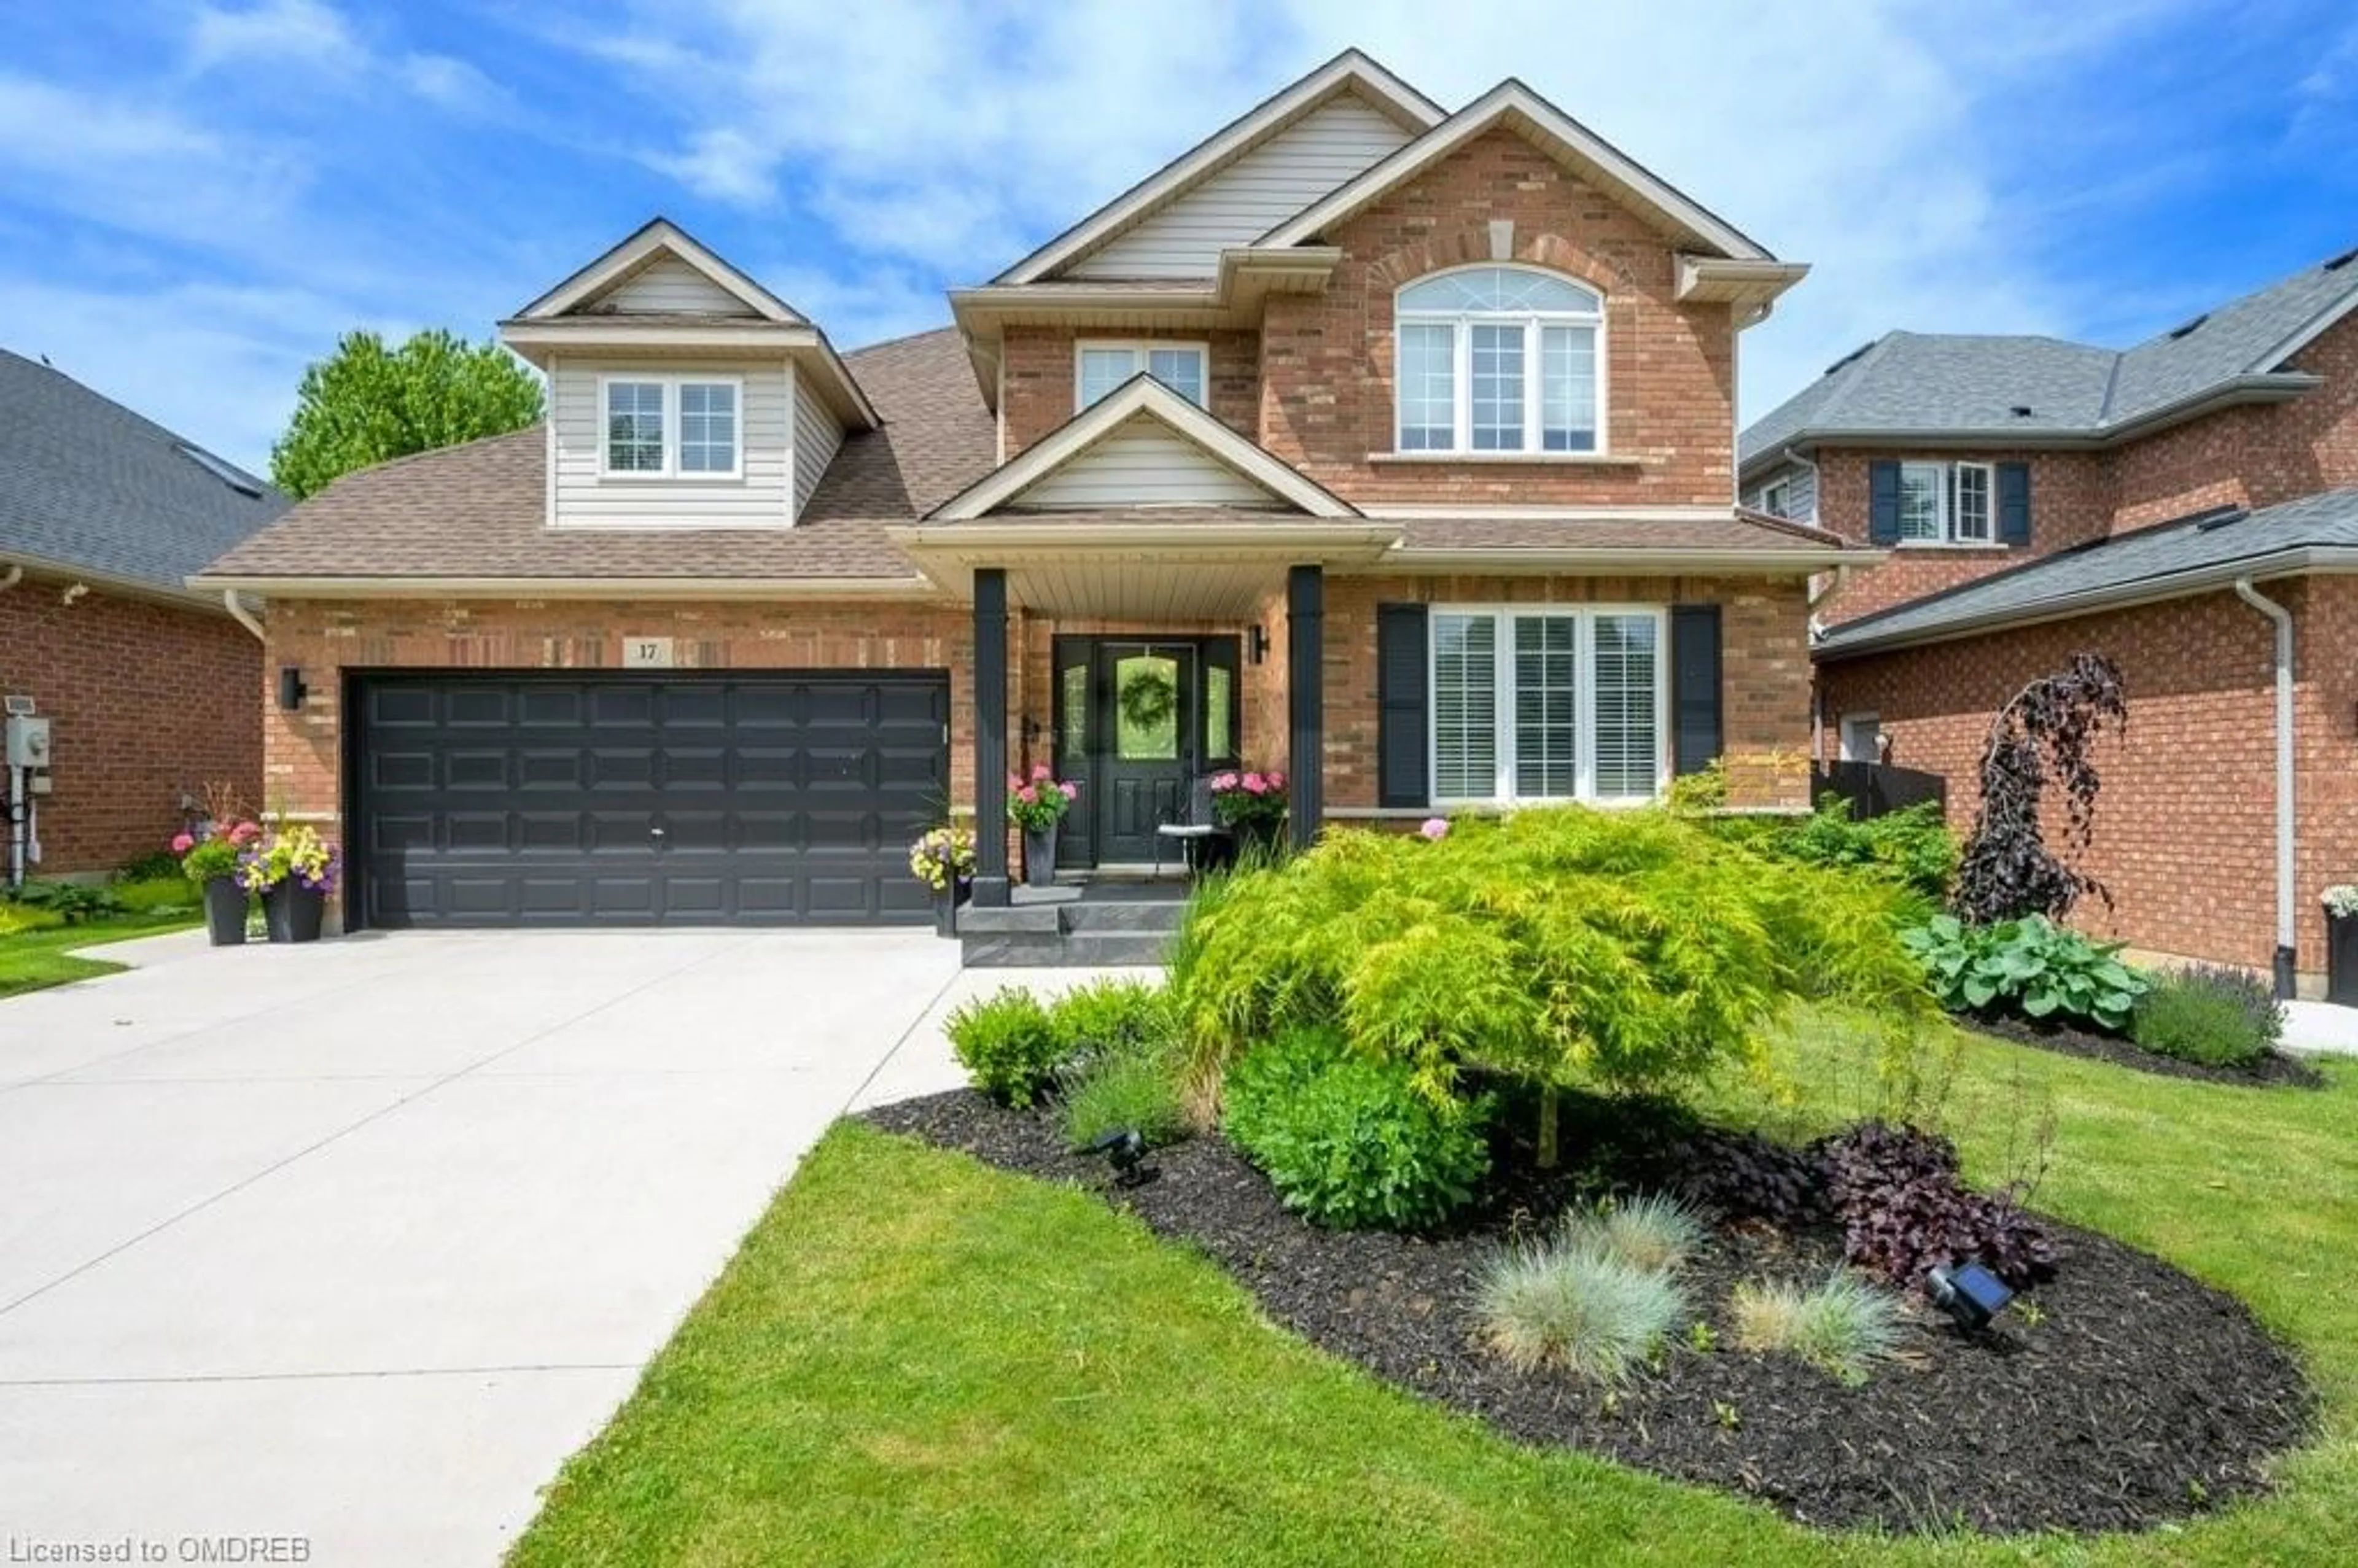 Home with brick exterior material for 17 Michaela Cres, Fonthill Ontario L0S 1E4